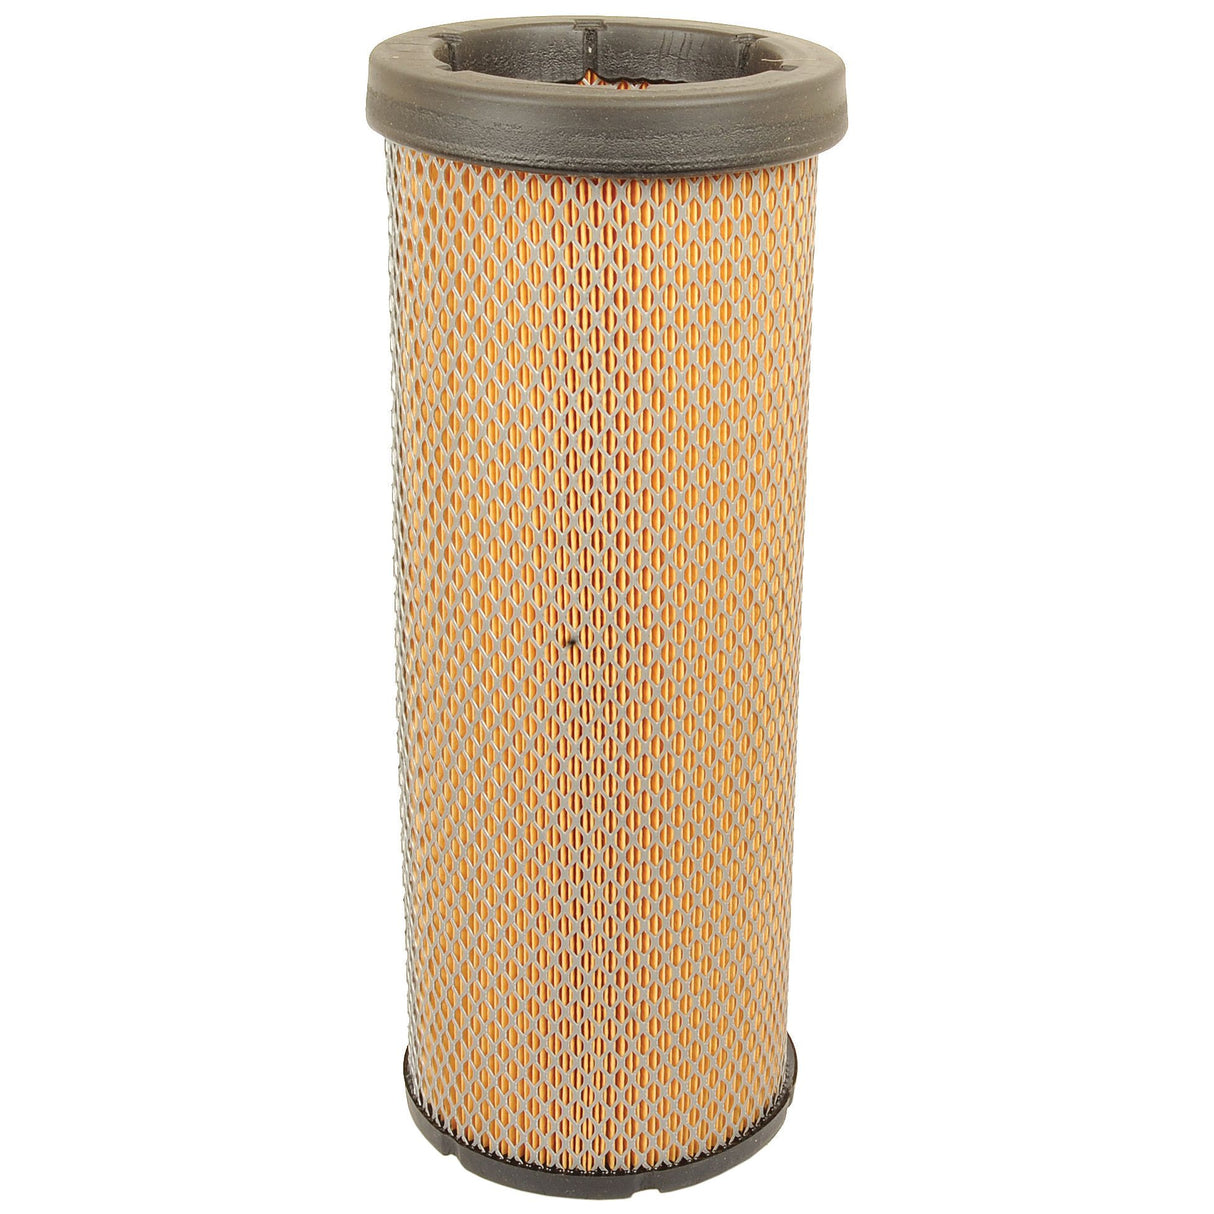 Air Filter - Inner - AF25360
 - S.76870 - Massey Tractor Parts